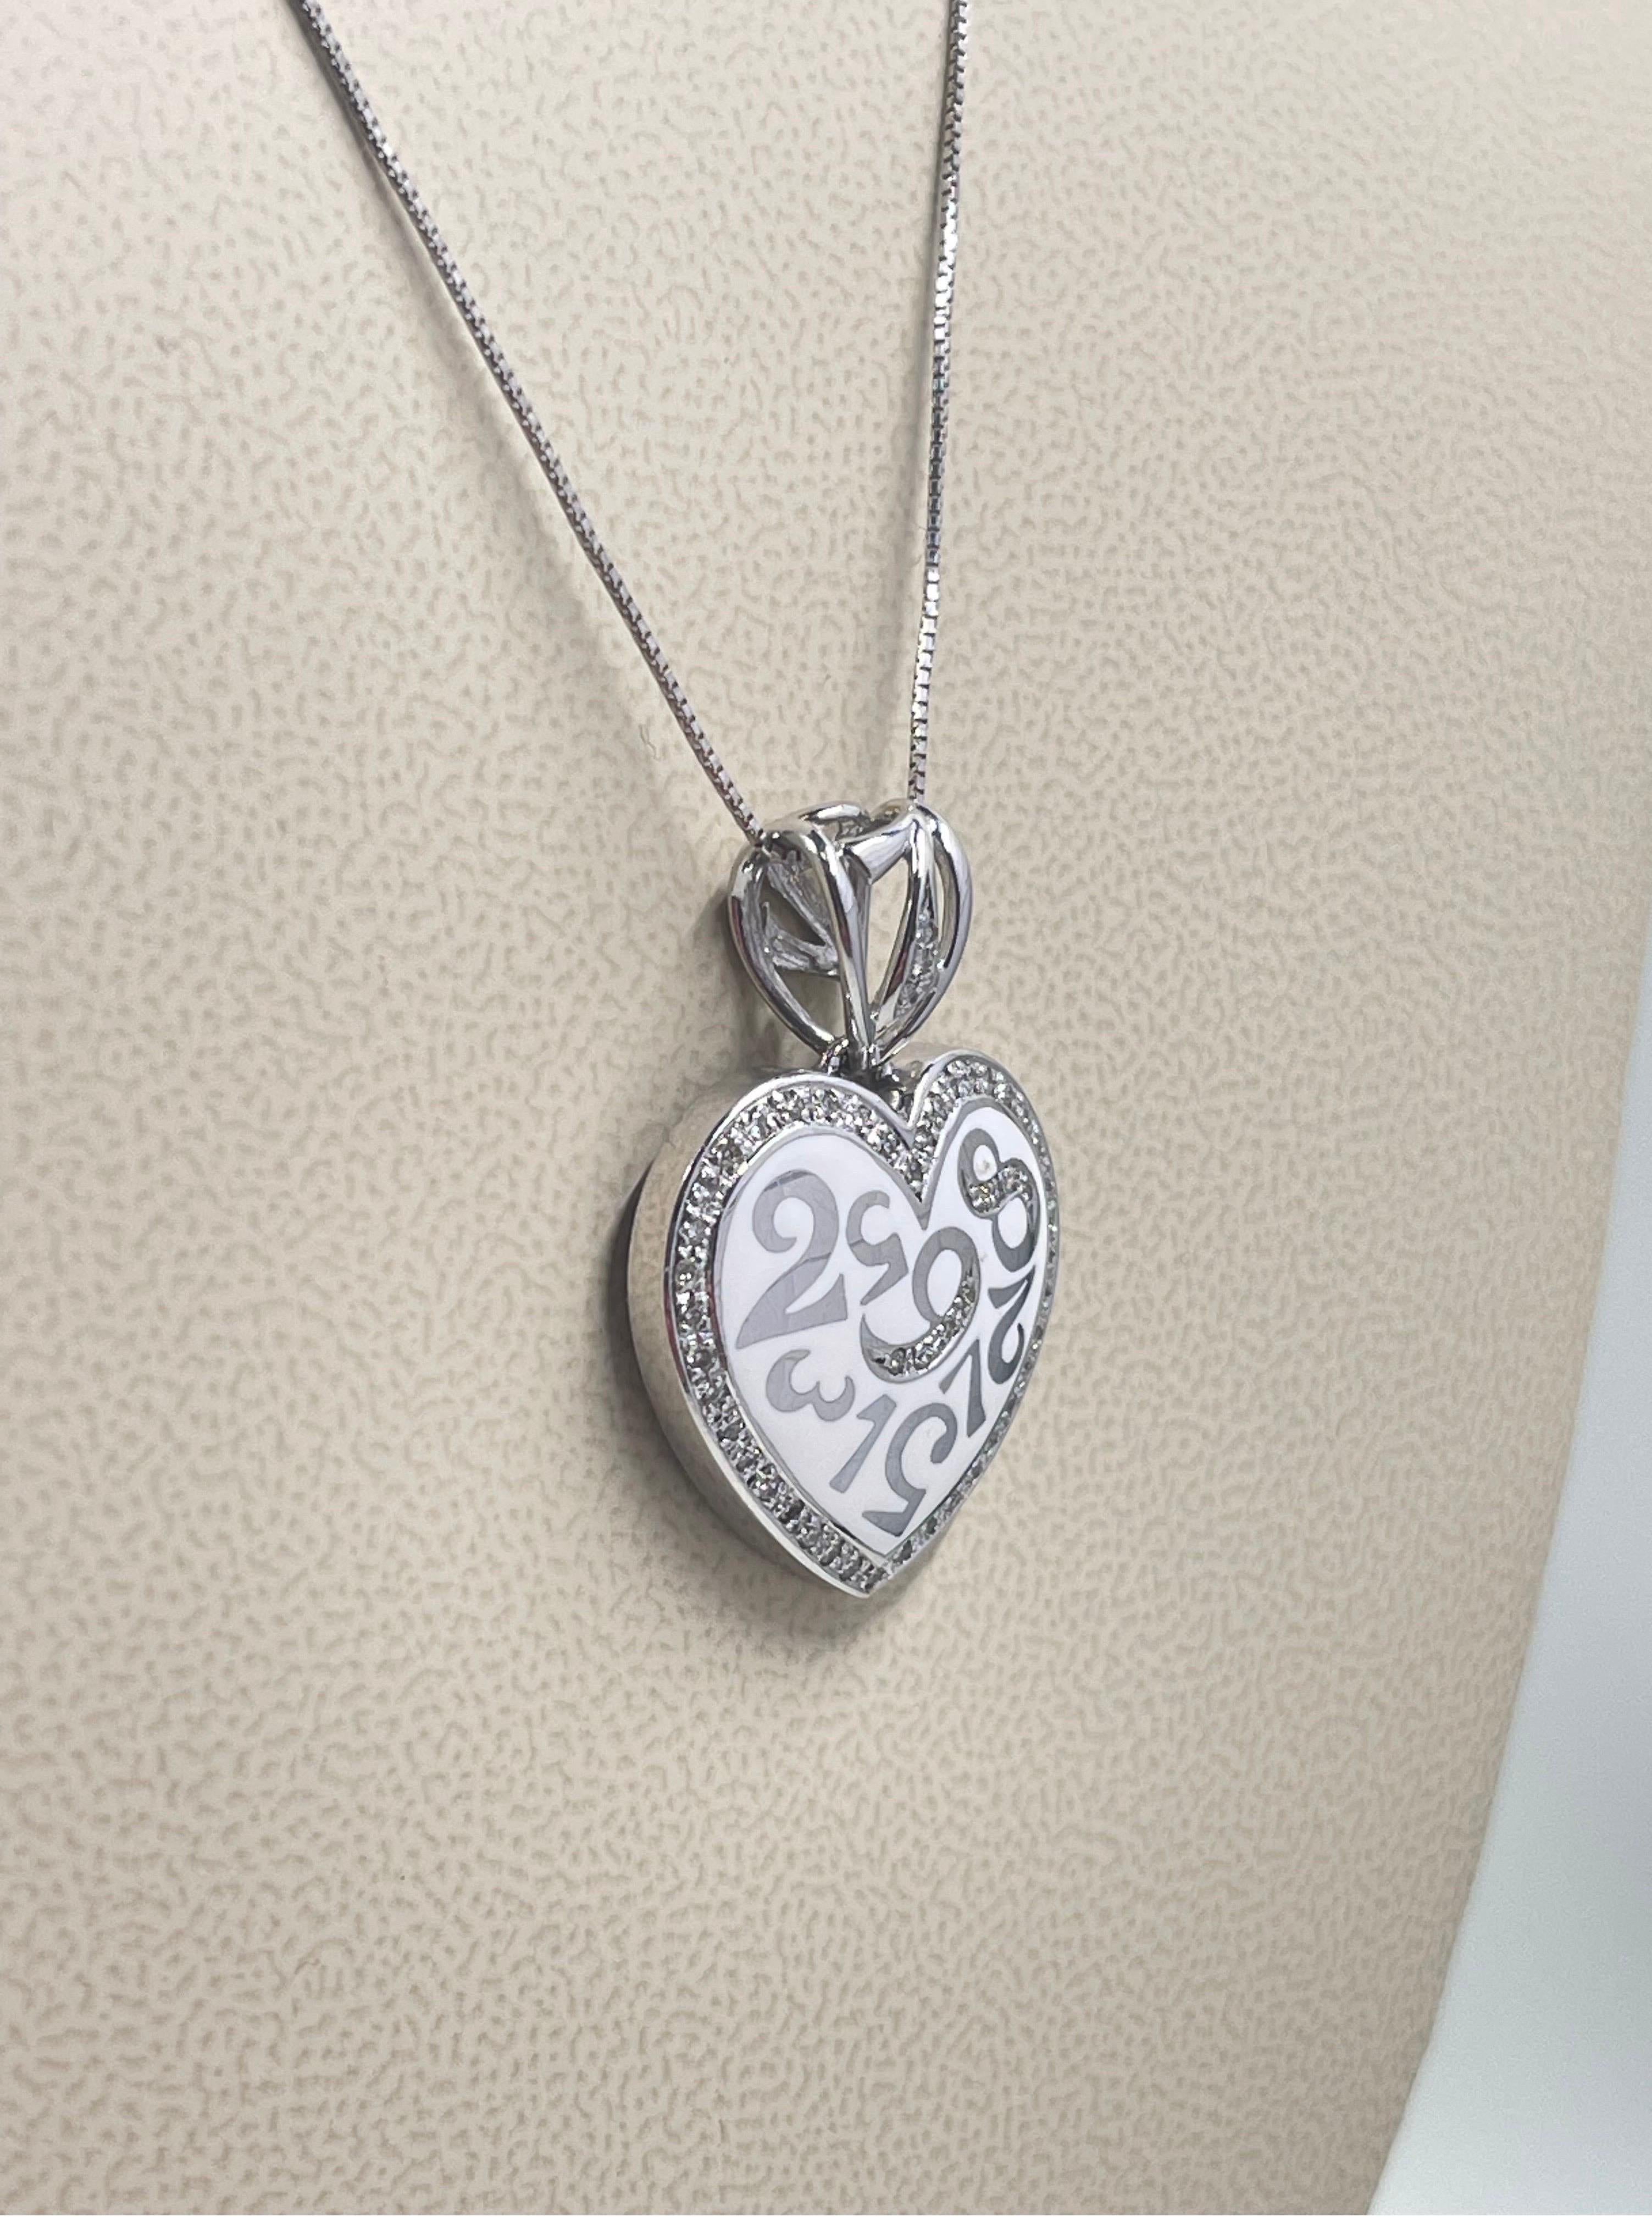 Modern Diamond And White Enamel Heart Necklace In 148k White Gold  For Sale